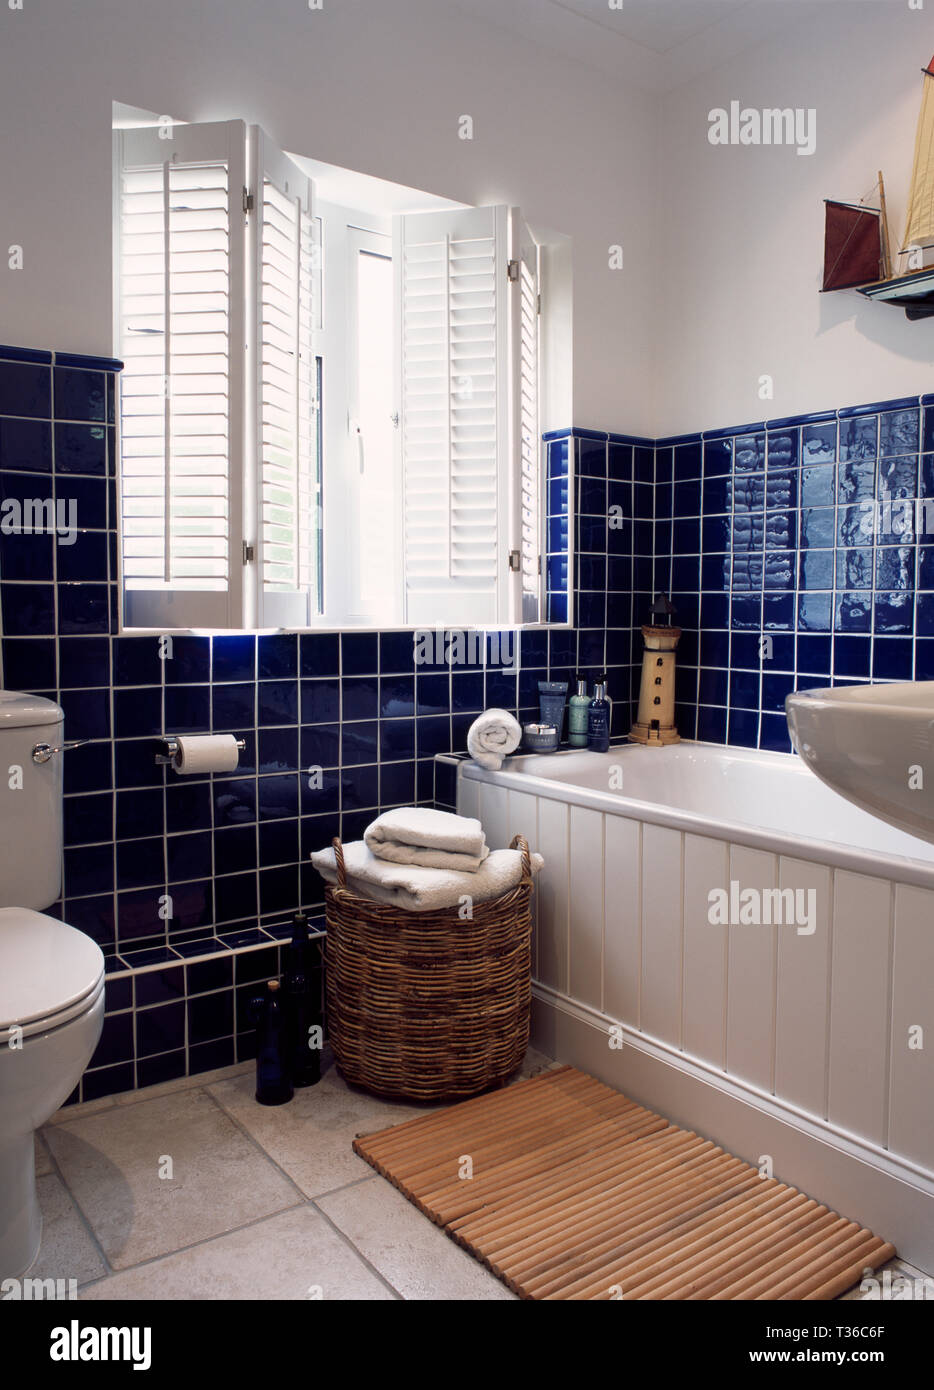 White Plantation Shutters In Bathroom With Blue Tiling Stock